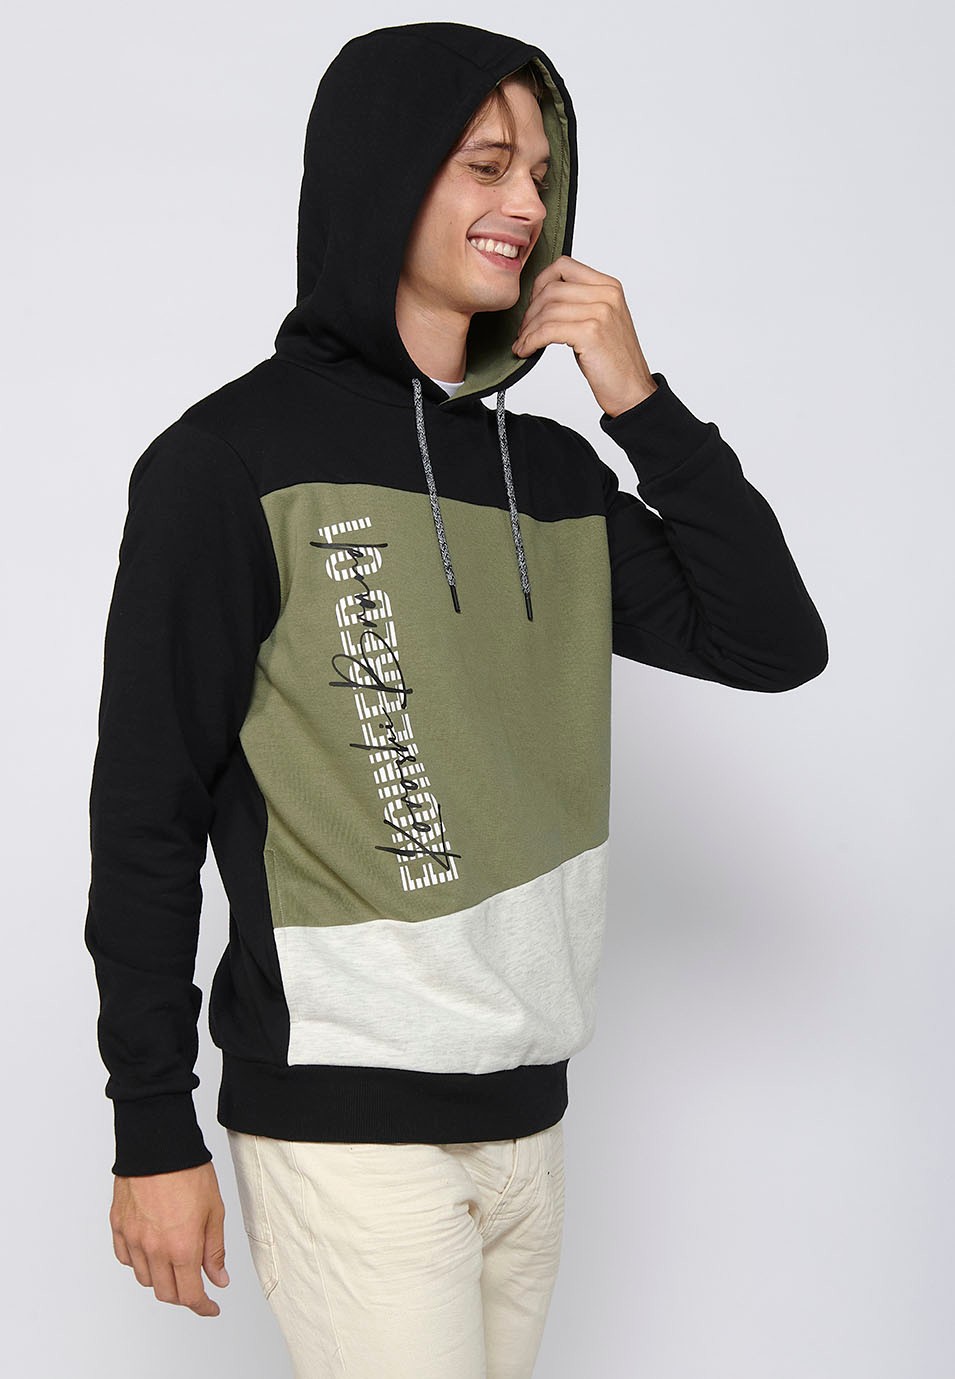 Long-sleeved sweatshirt with hooded collar and front details in Khaki color for Men